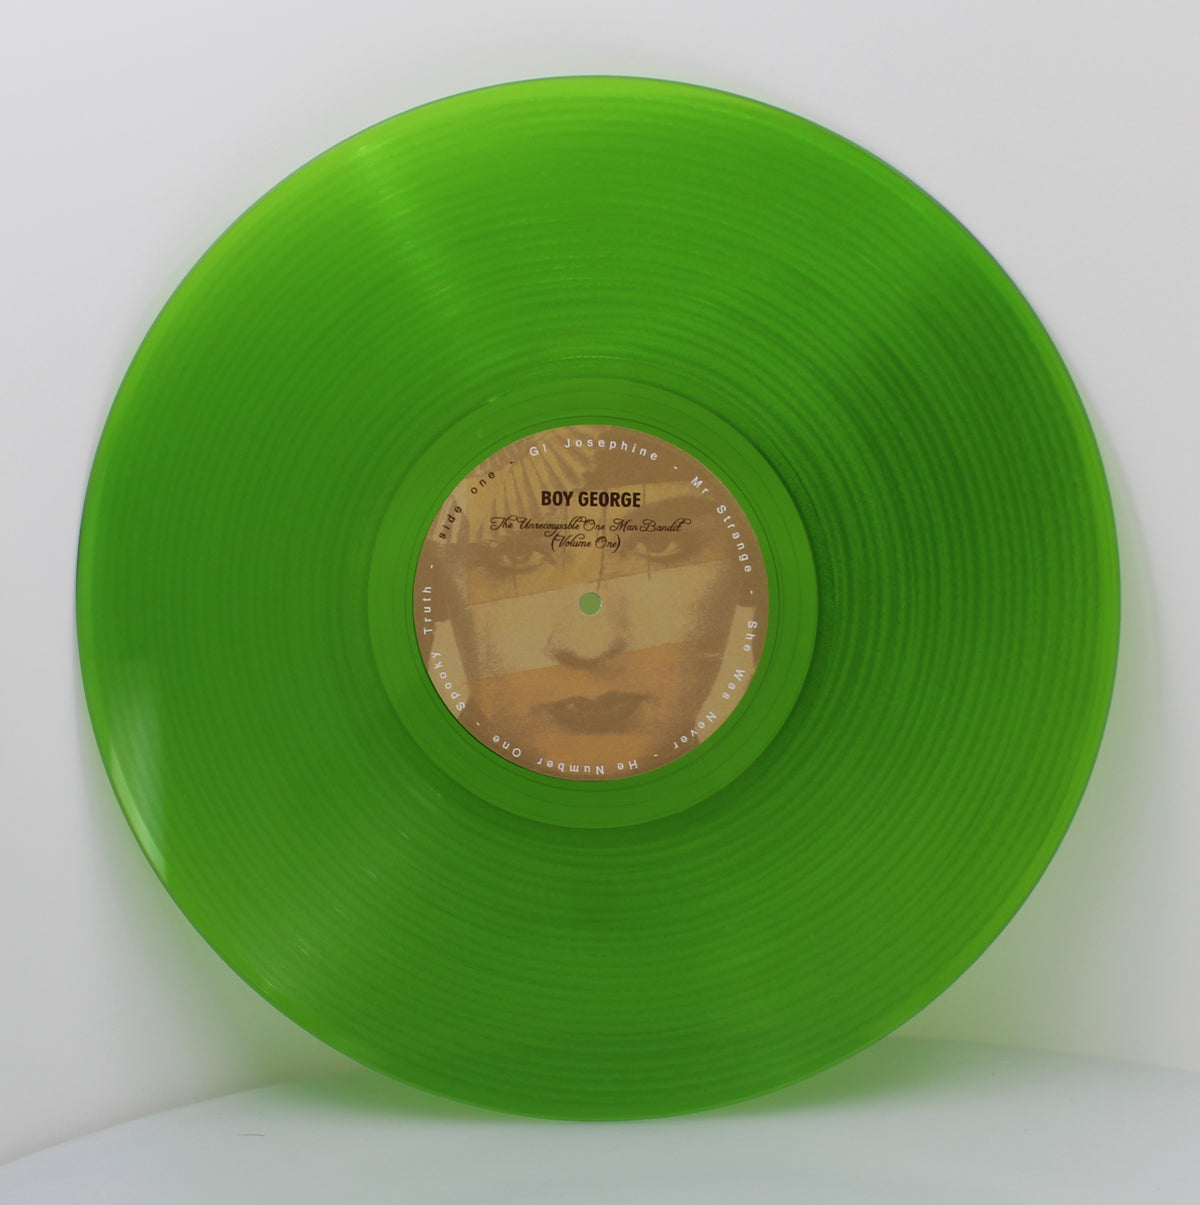 Boy George – The Unrecoupable One Man Bandit, Vinyl, LP, Limited Edition, Numbered, Green Transparent, Germany 1998